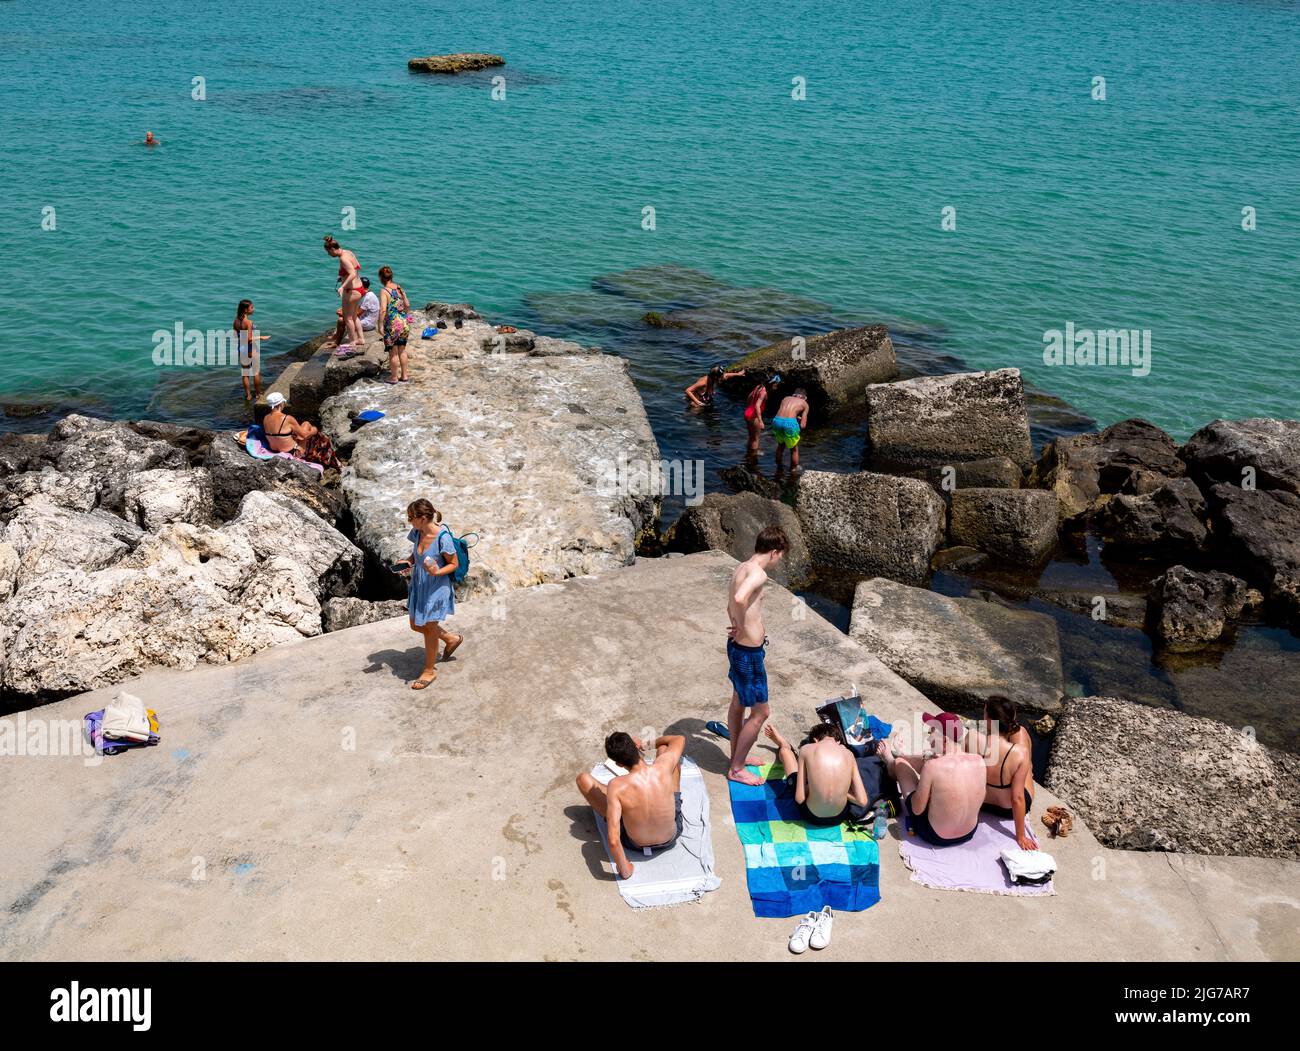 Diverse groups of people enjoying a swim and sunbathing on the rocks of the bay of Otranto on a hot summer day Stock Photo